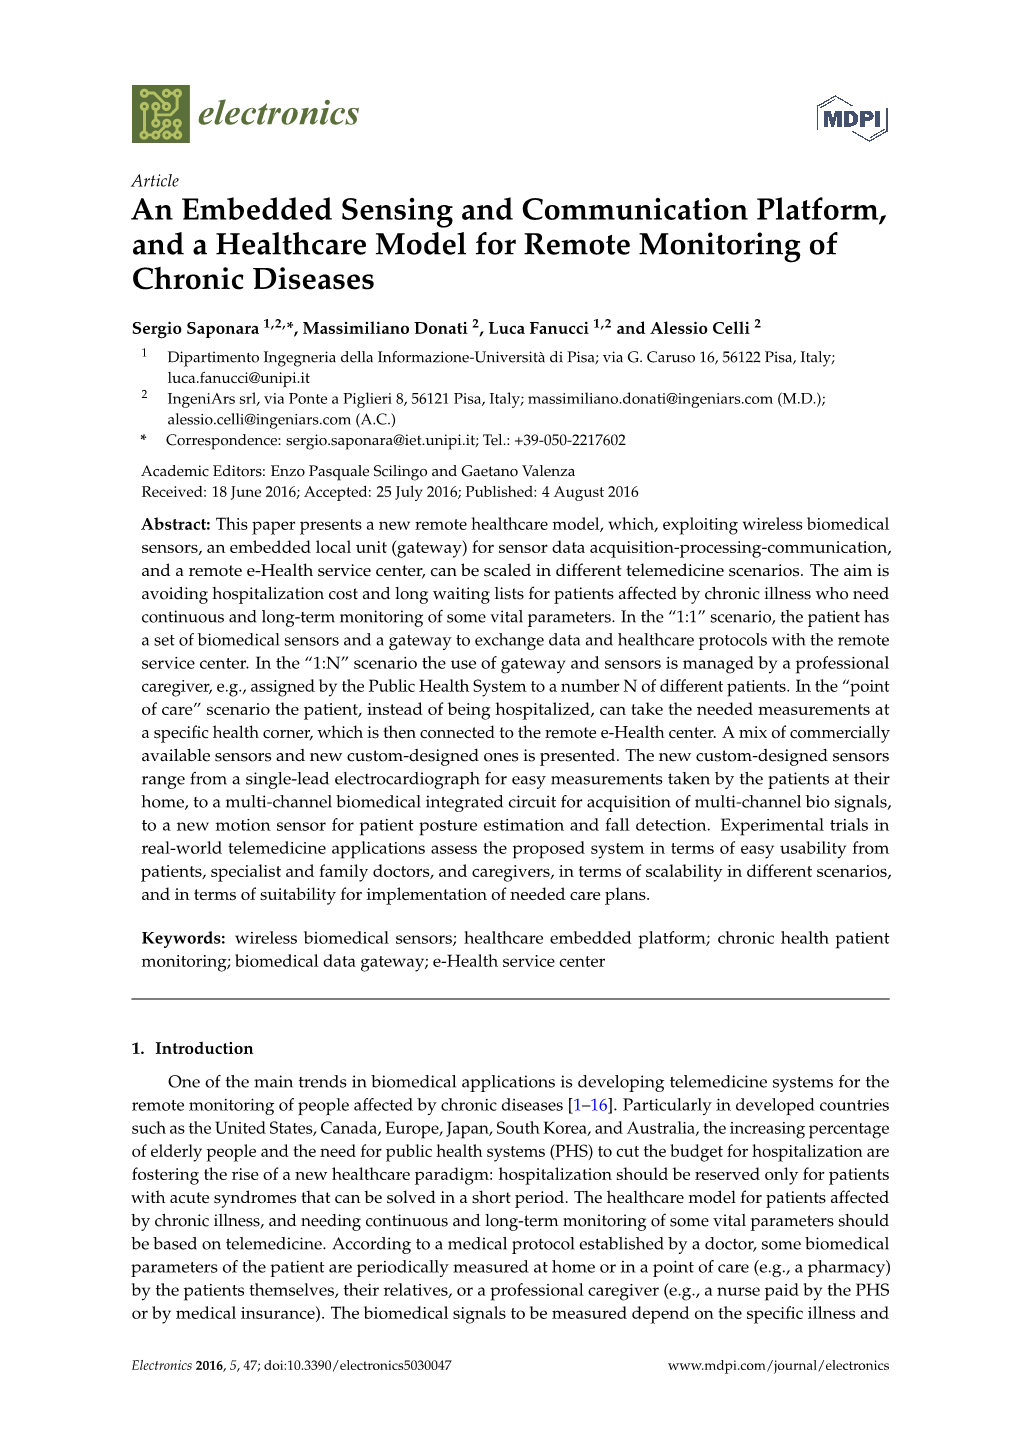 An Embedded Sensing and Communication Platform, and a Healthcare Model for Remote Monitoring of Chronic Diseases